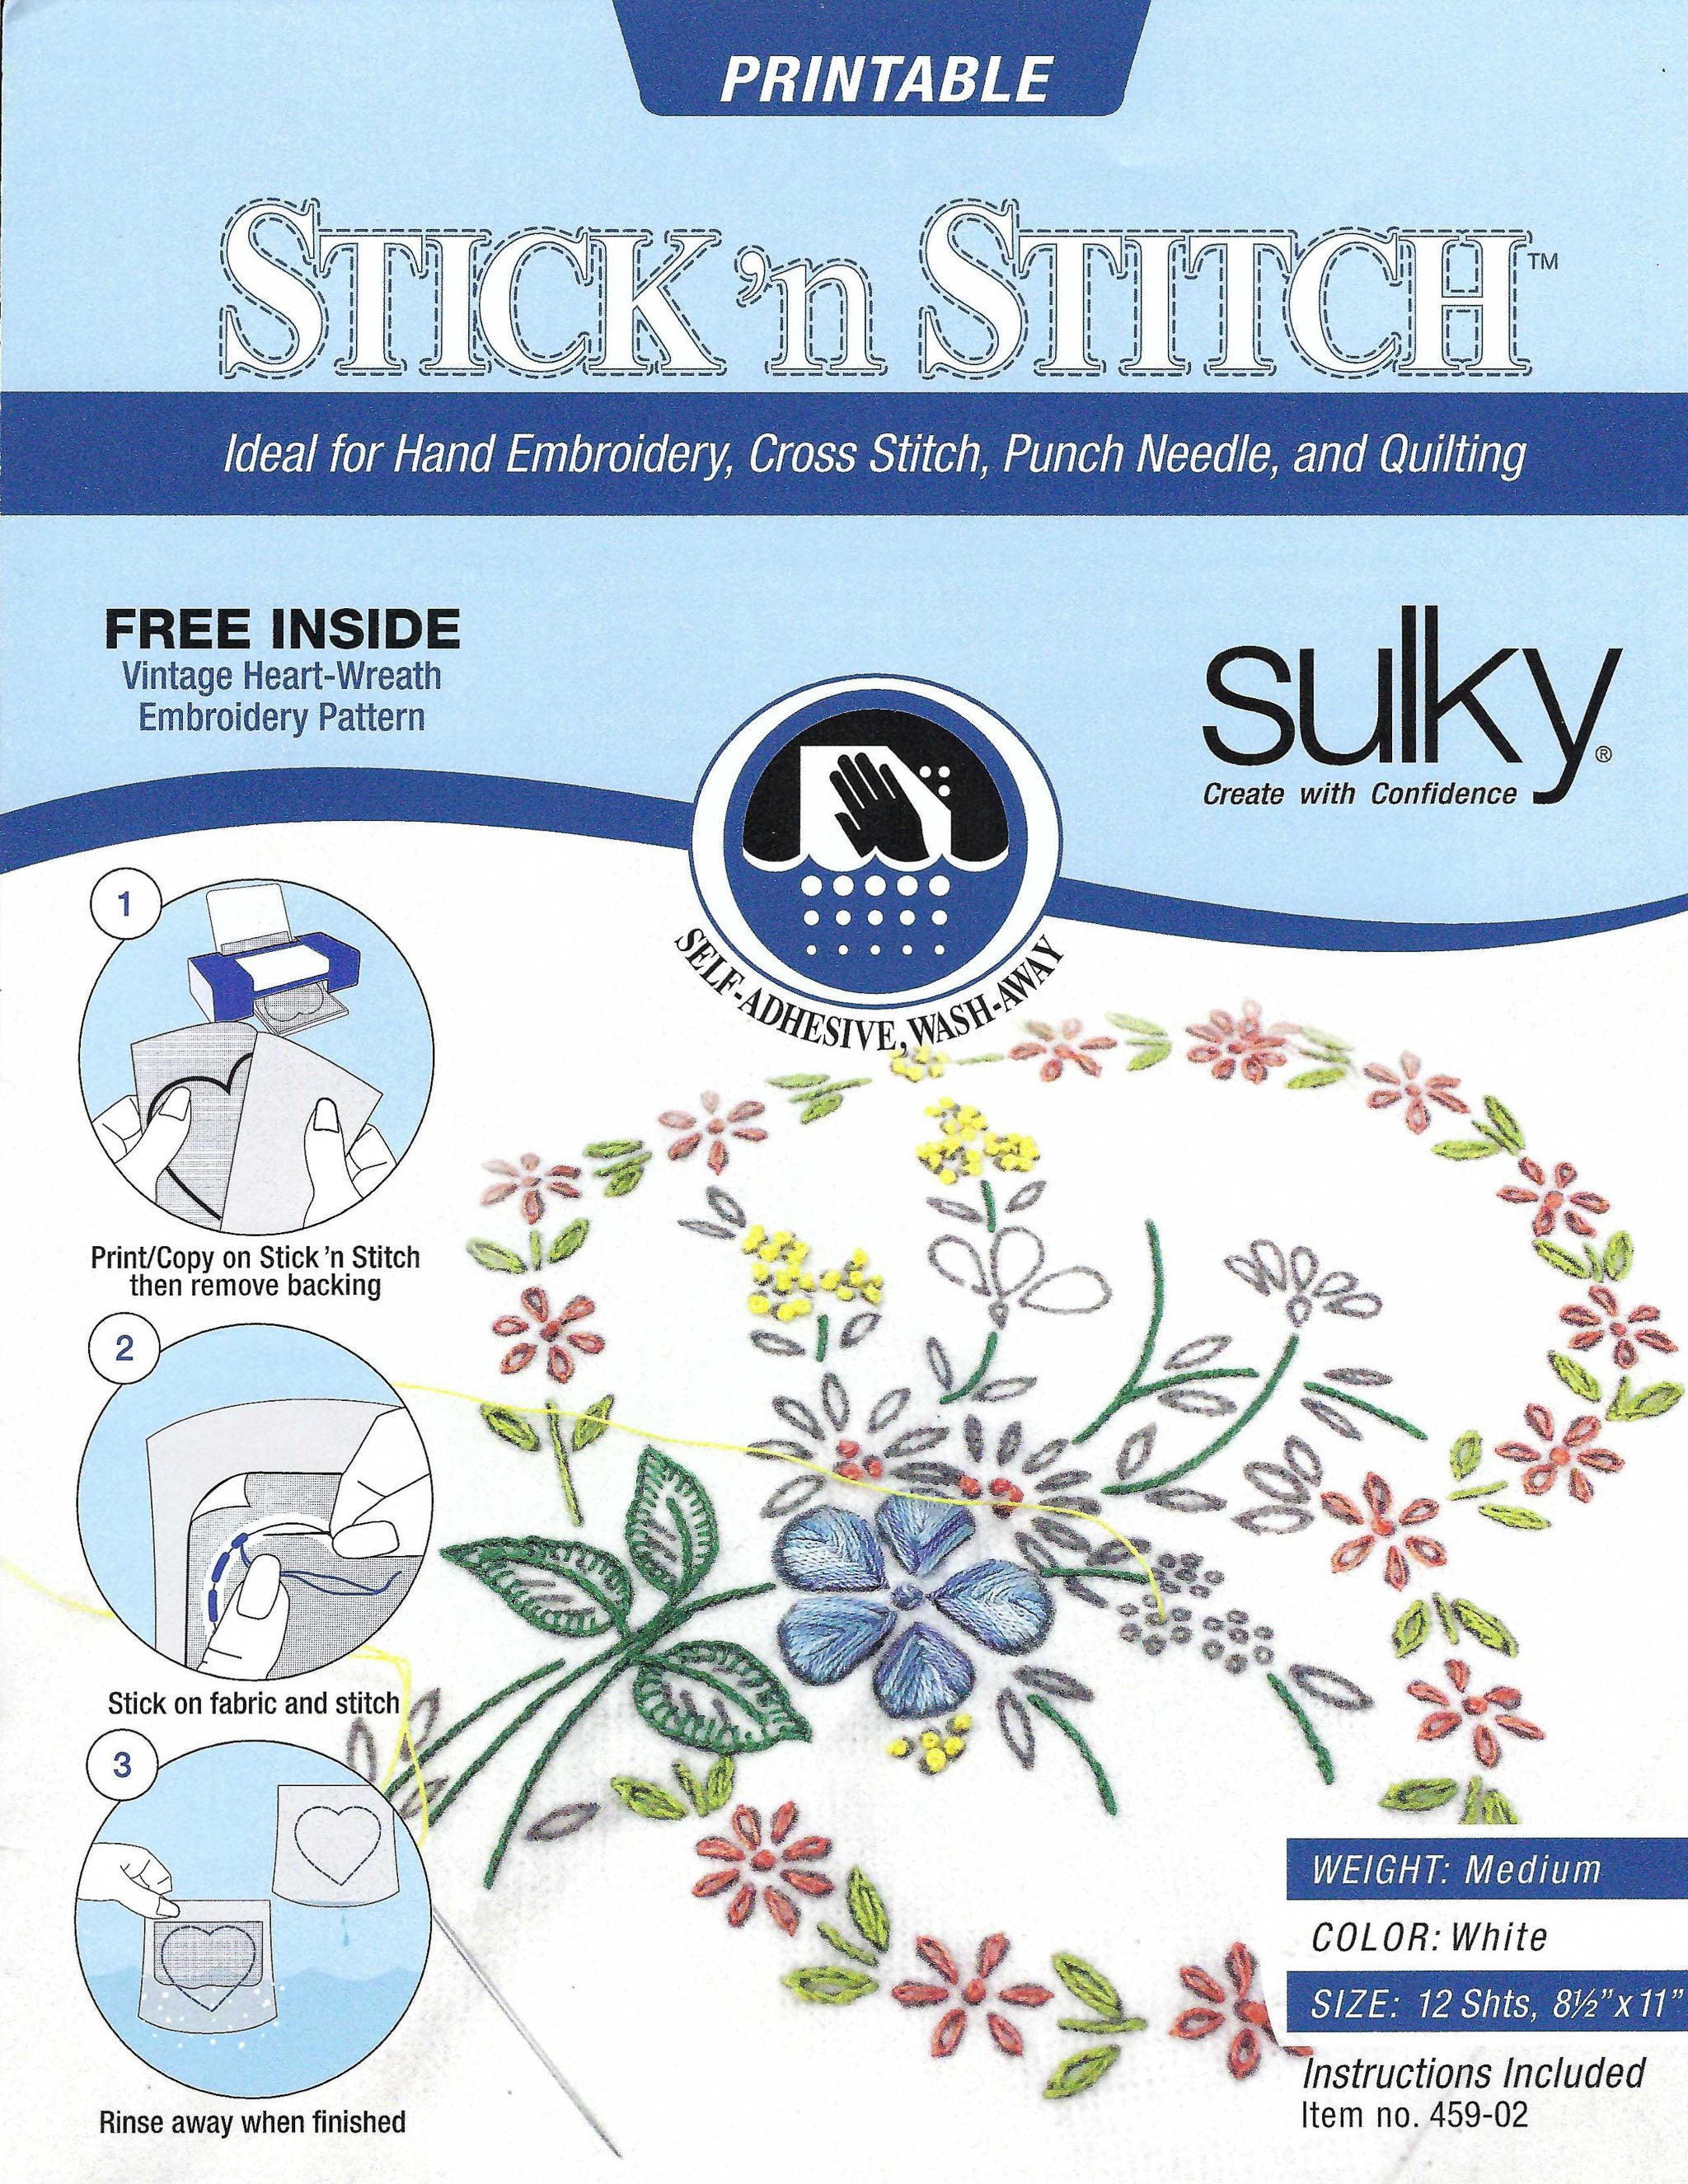 12 Sheets, Stick N Stitch, Printable Stabilizer, Sulky Fabri Solvy,  Printable Embroidery, Water Soluble Paper, Sulky Stabilizer 